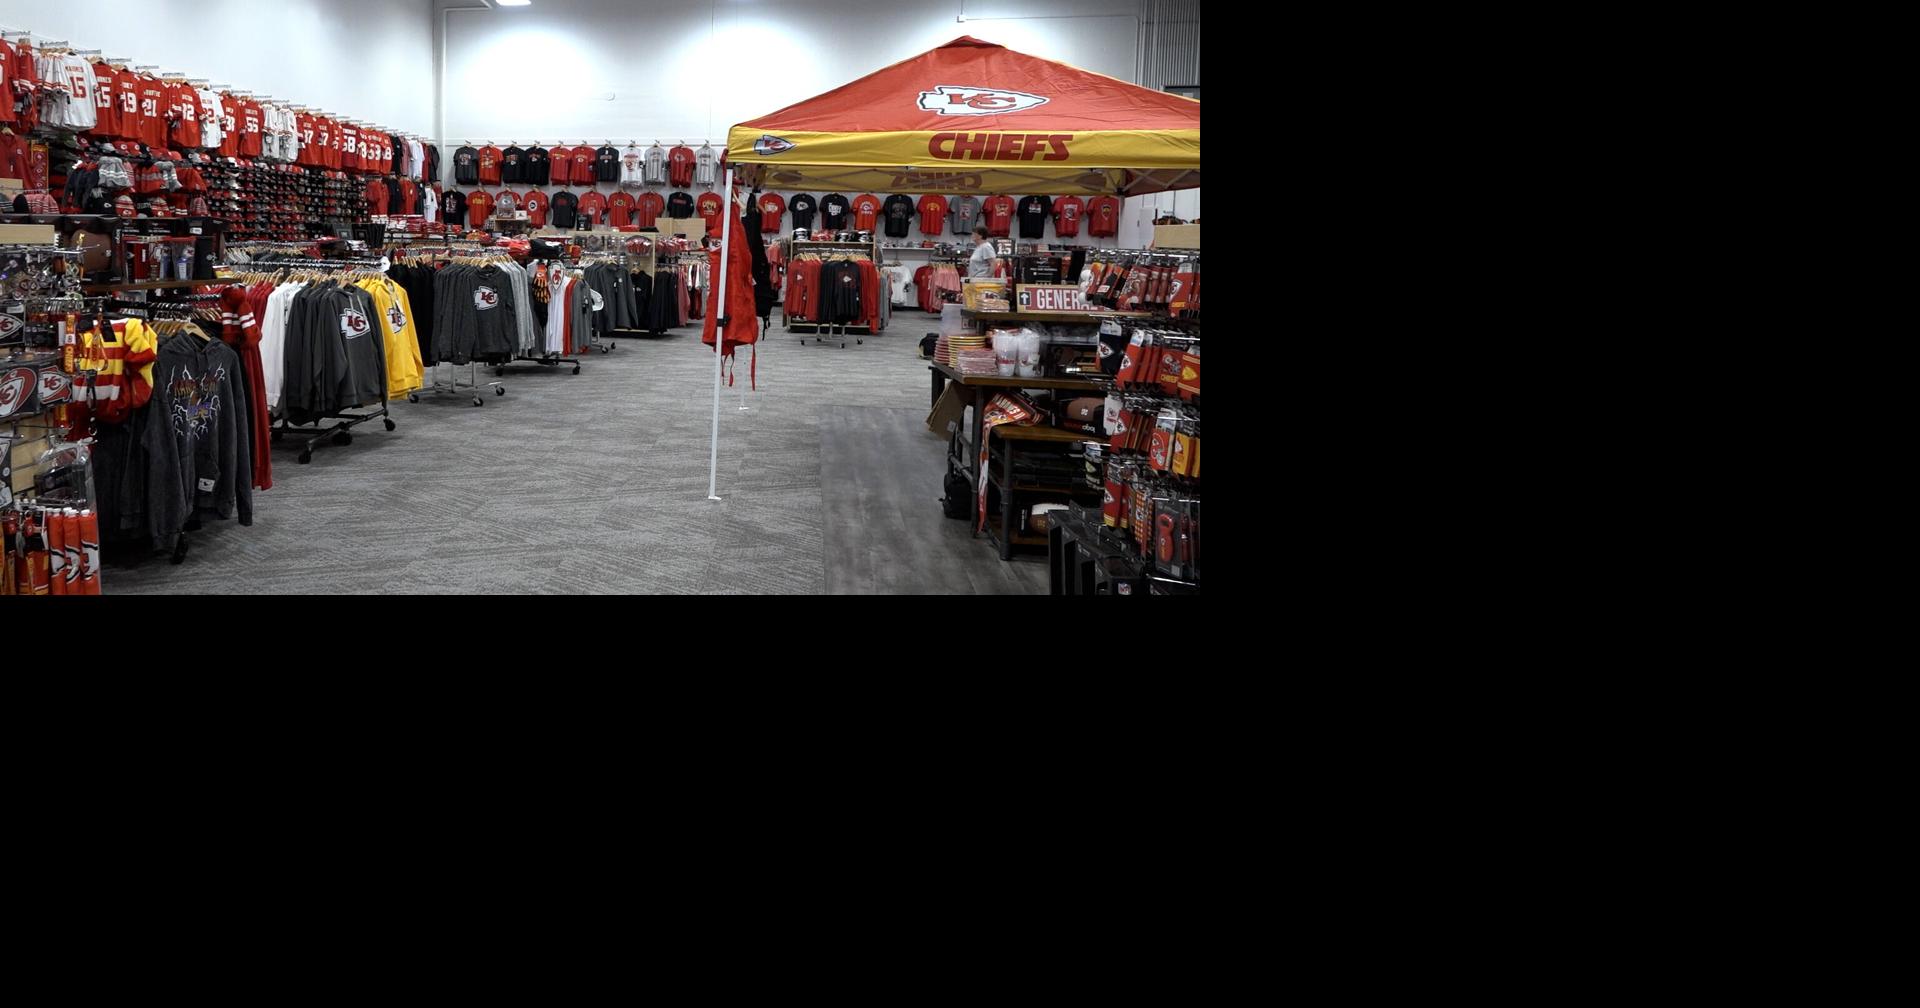 Sports retailer ready to welcome Chiefs fans for camp, Business